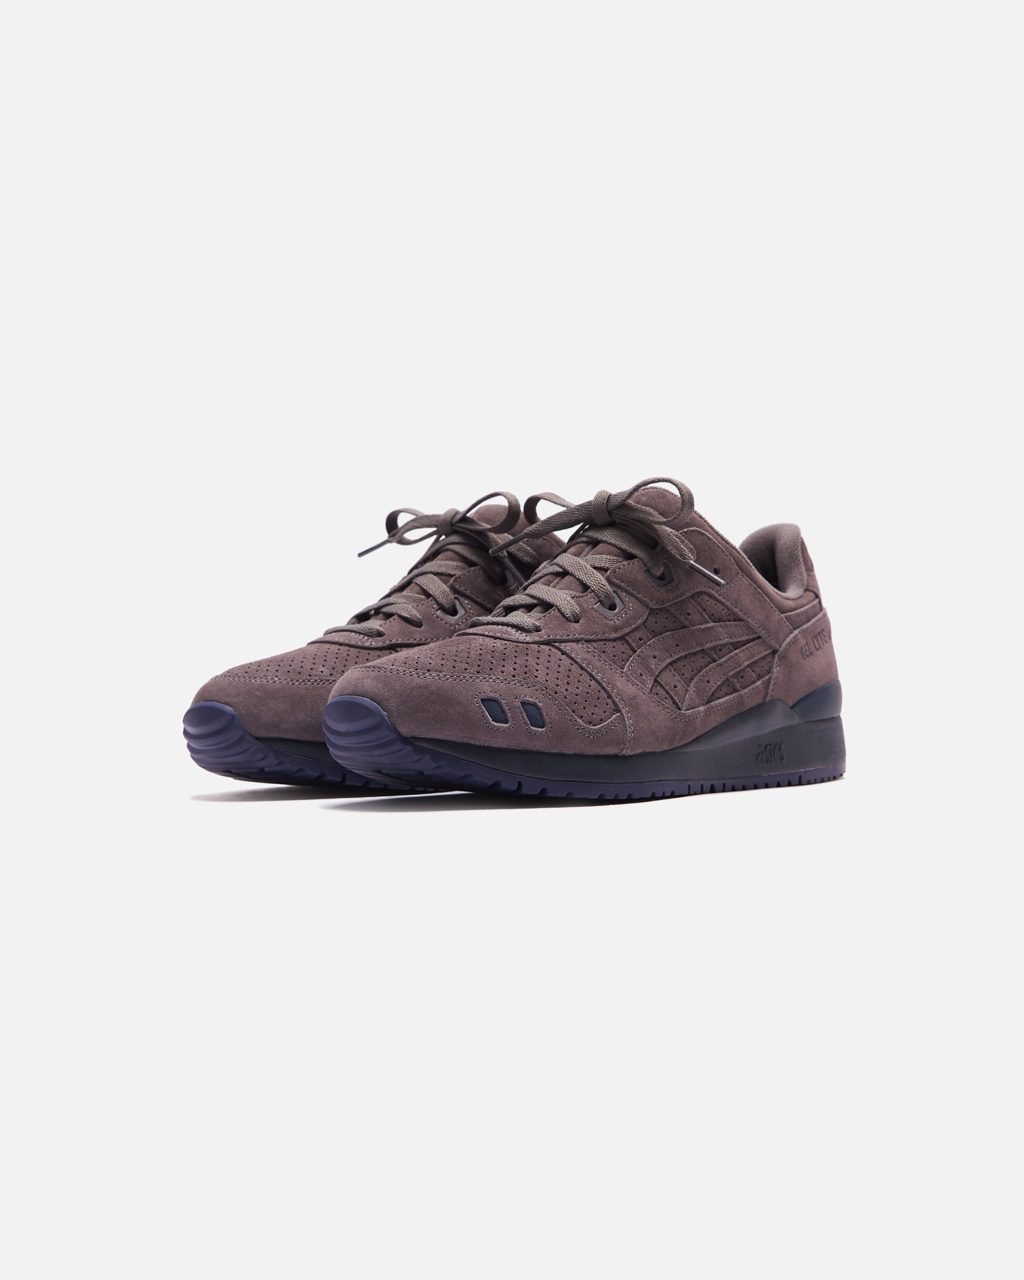 kith-ronnie-fieg-for-asics-the-palette-release-20201127